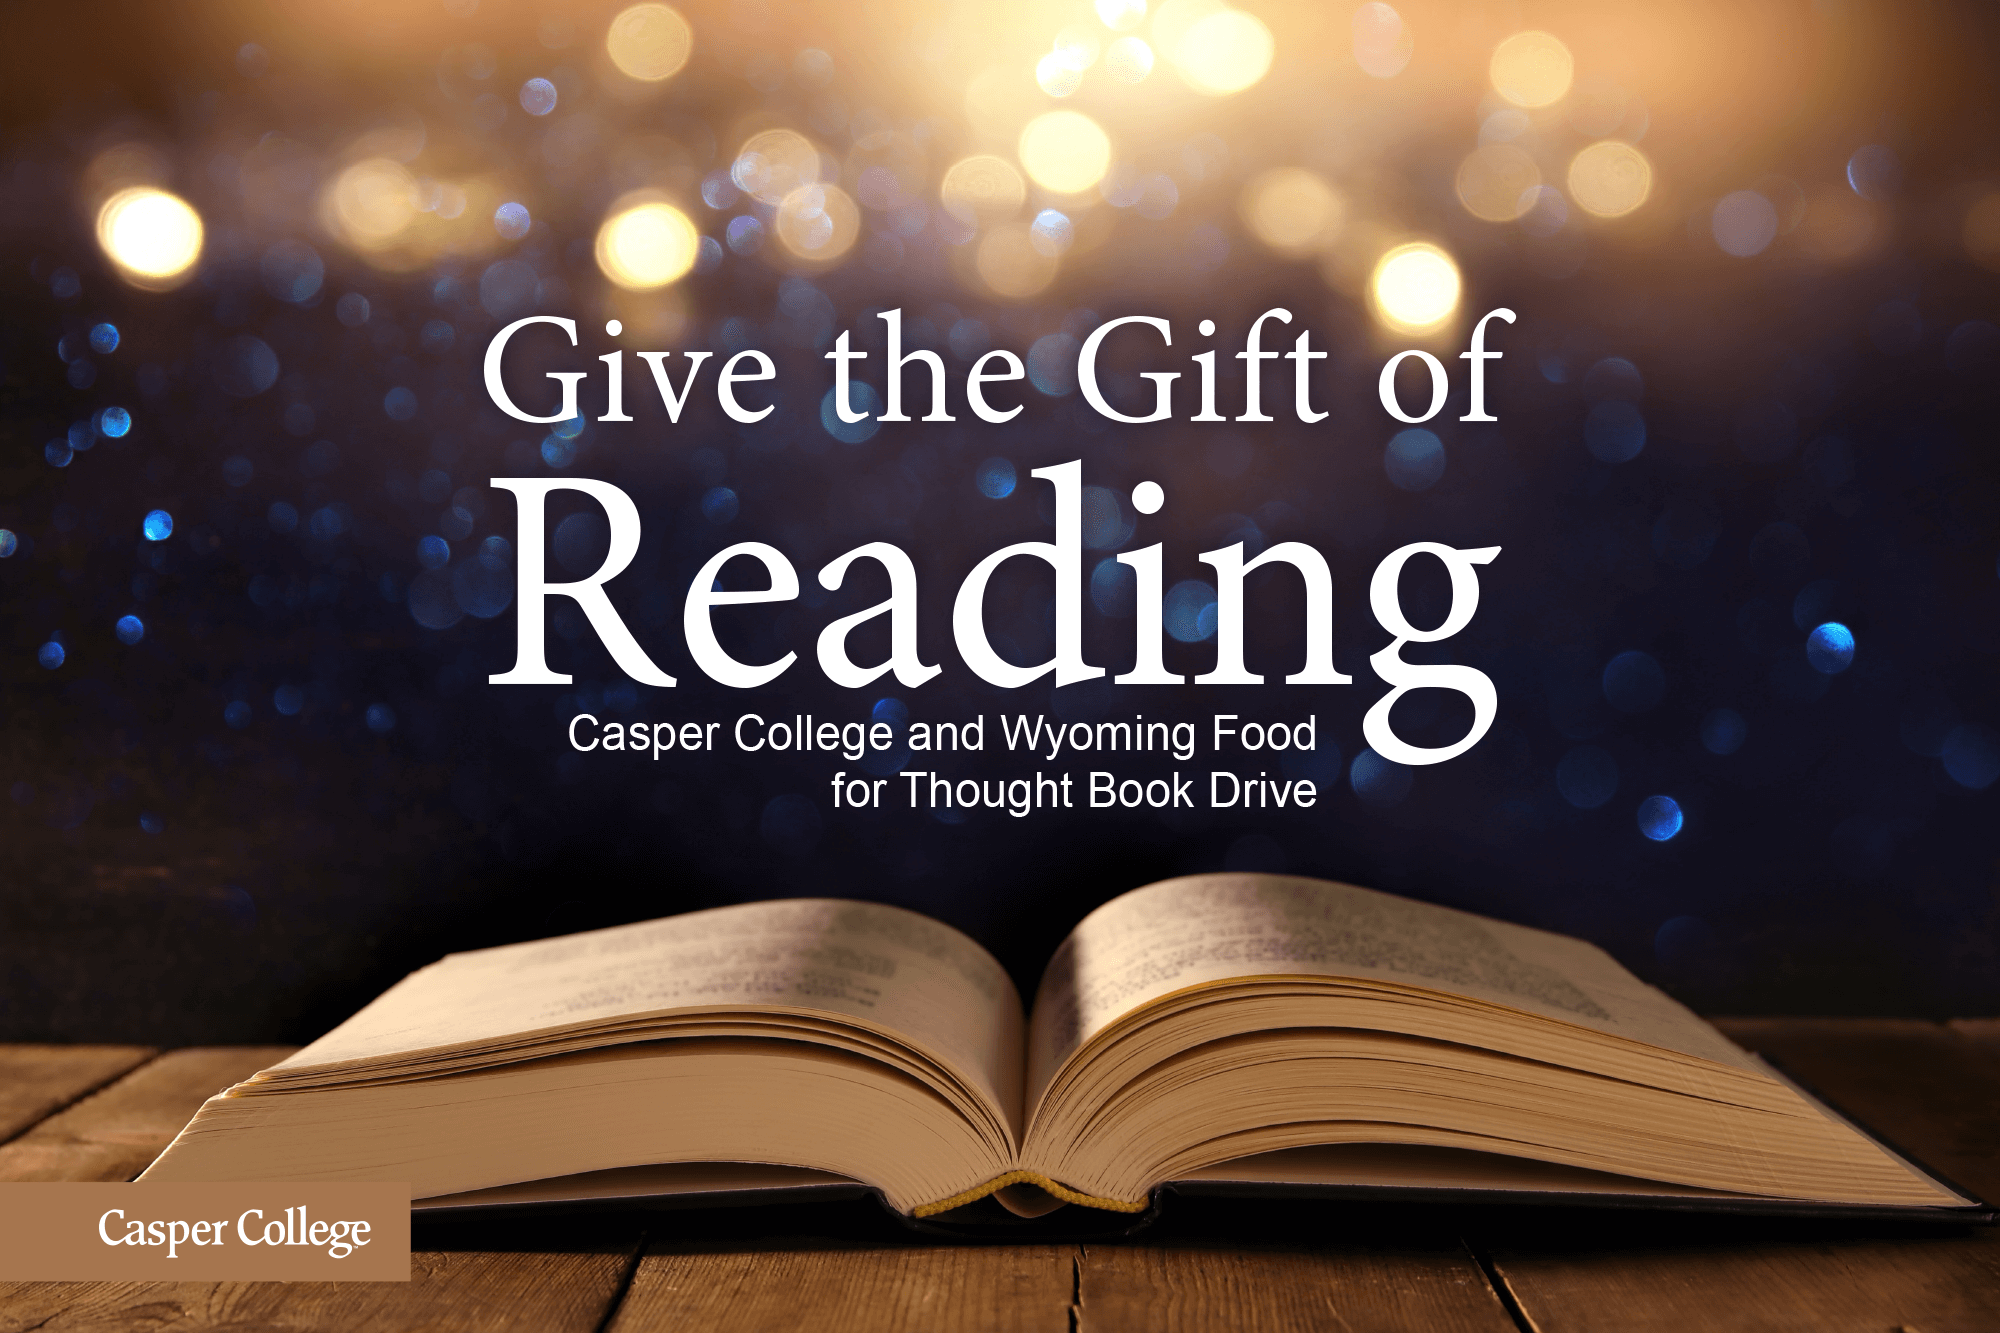 Image of an open book with the words "Give the Gift of Reading Casper College and Wyoming Food for Thought Book Drive."